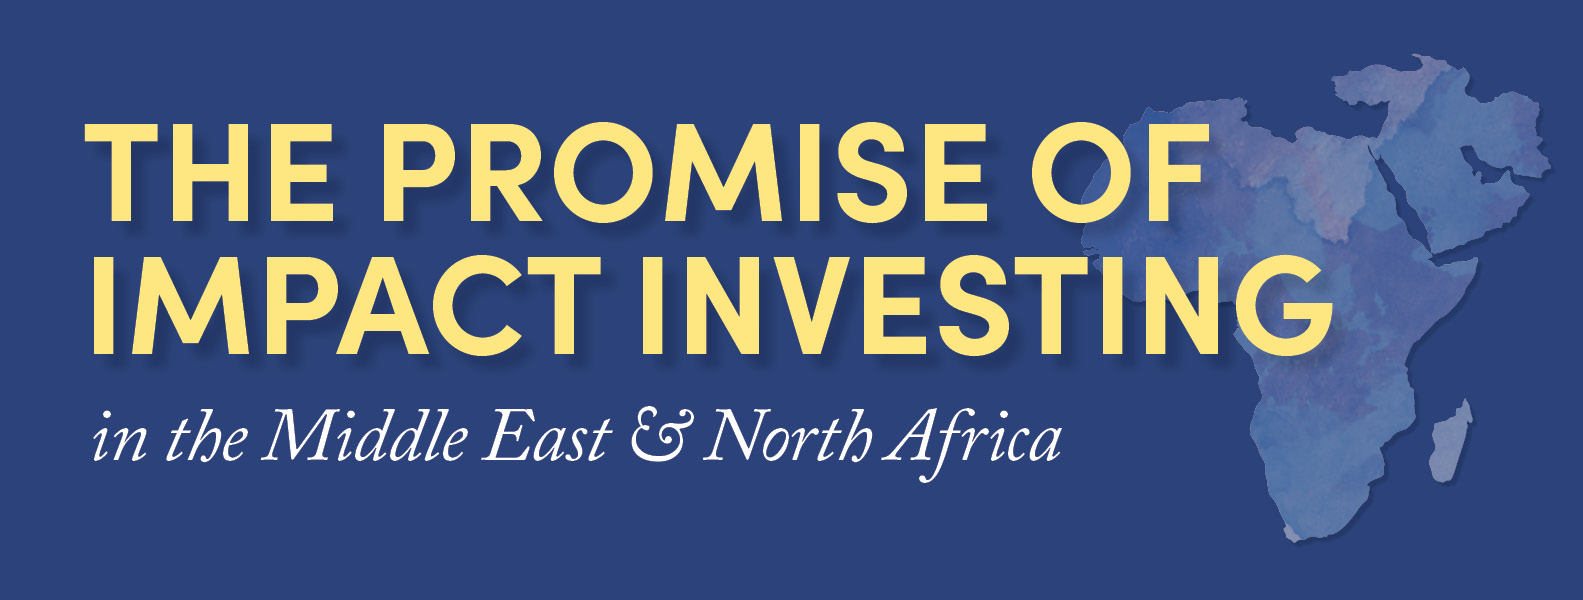 The Promise of Impact Investing in MENA